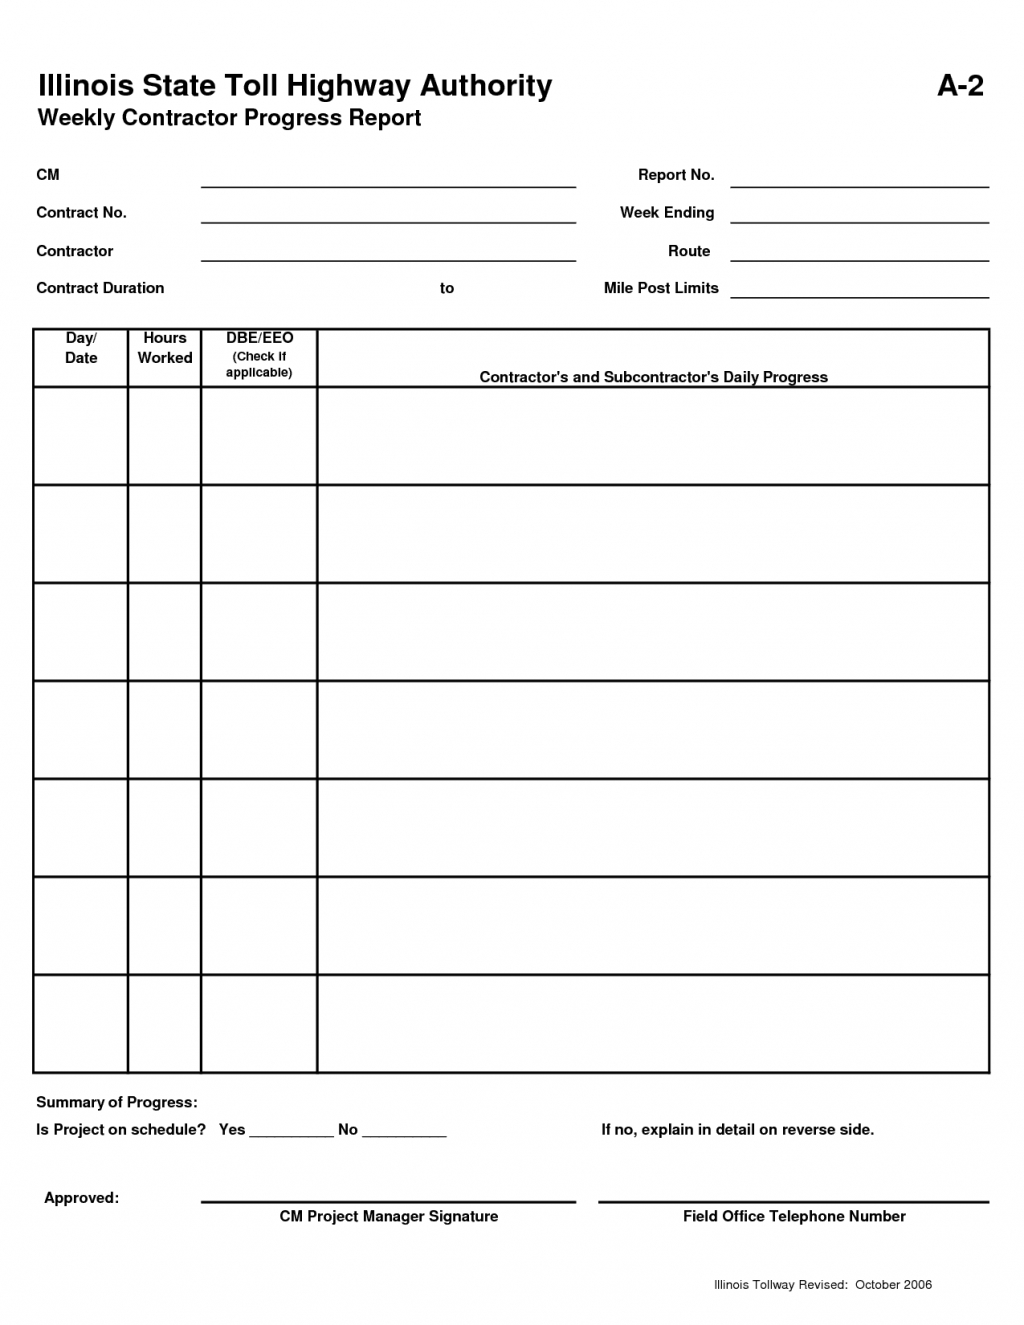 Bookkeeping Eadsheet For Small Business And Gas Station With Regard To Daily Report Sheet Template